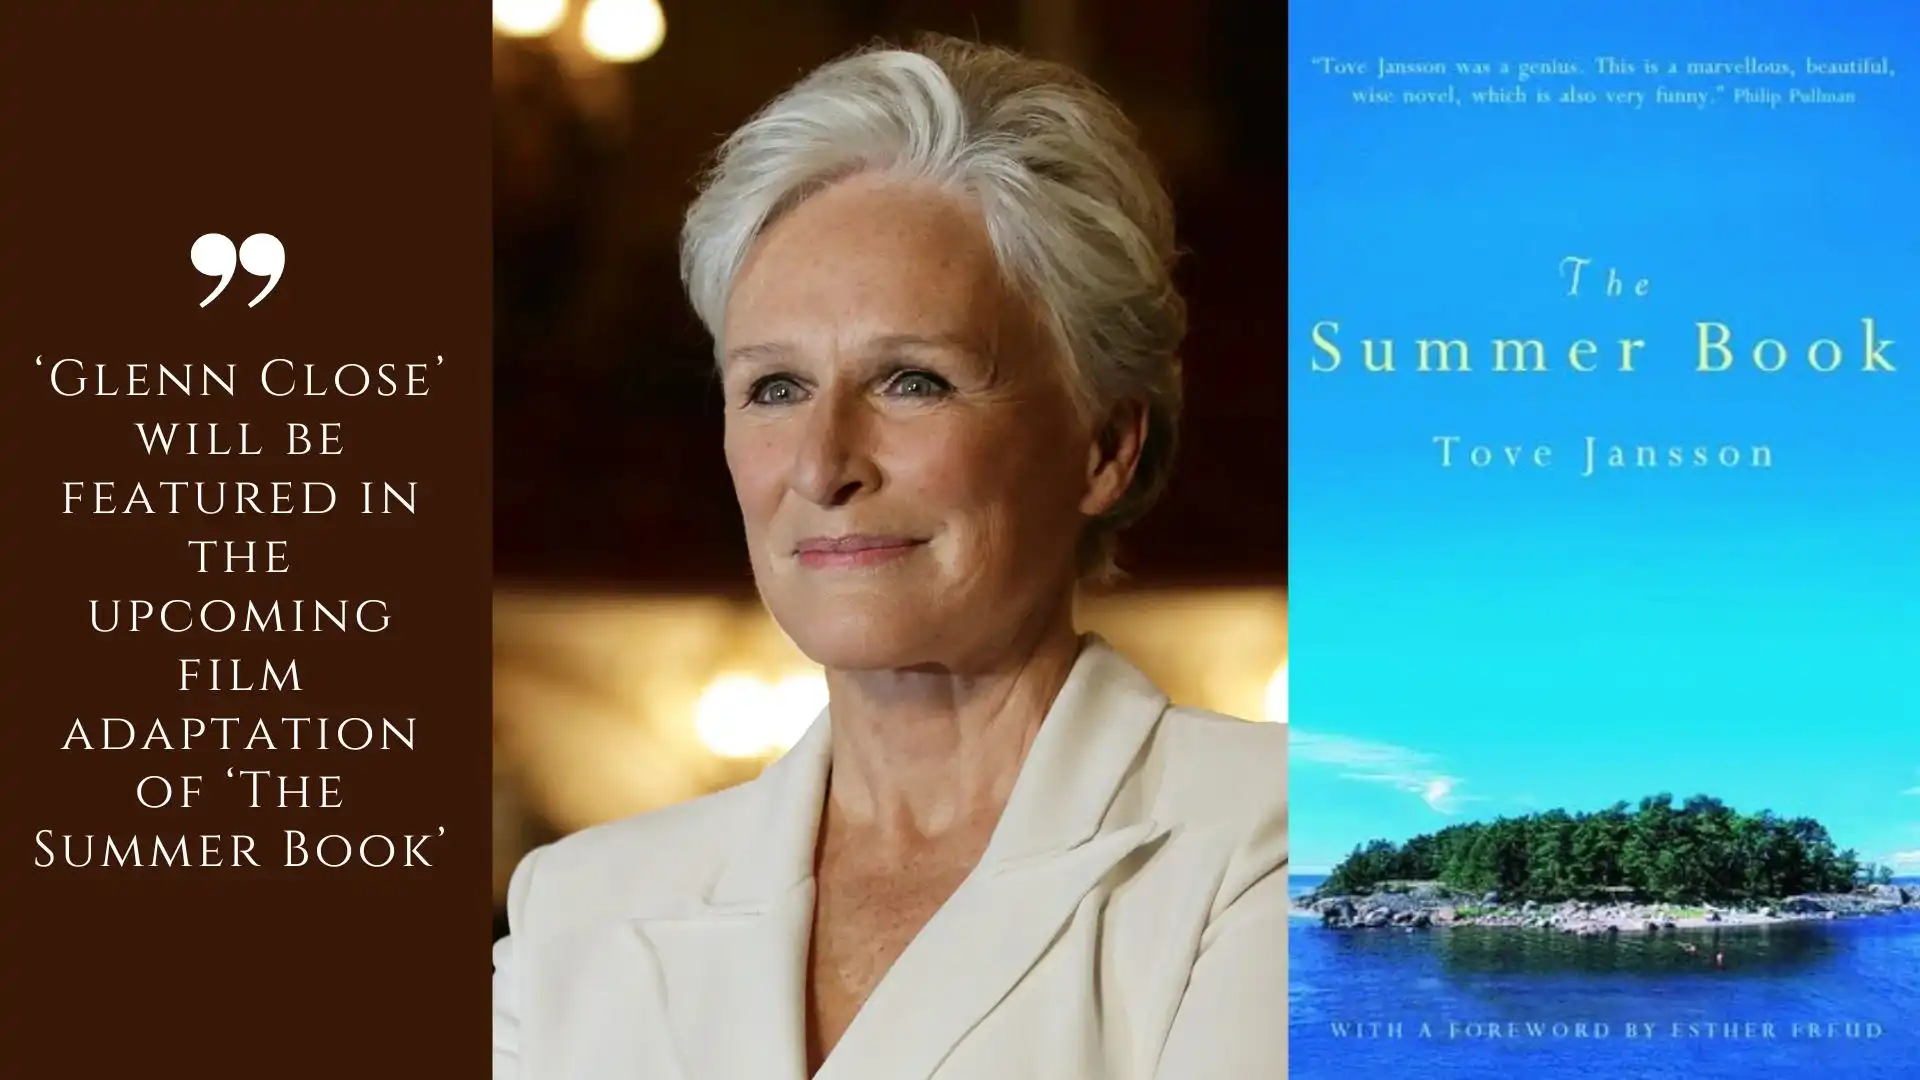 ‘Glenn Close’ will be featured in the upcoming film adaptation of ‘The Summer Book’ (Image credit: amazon)